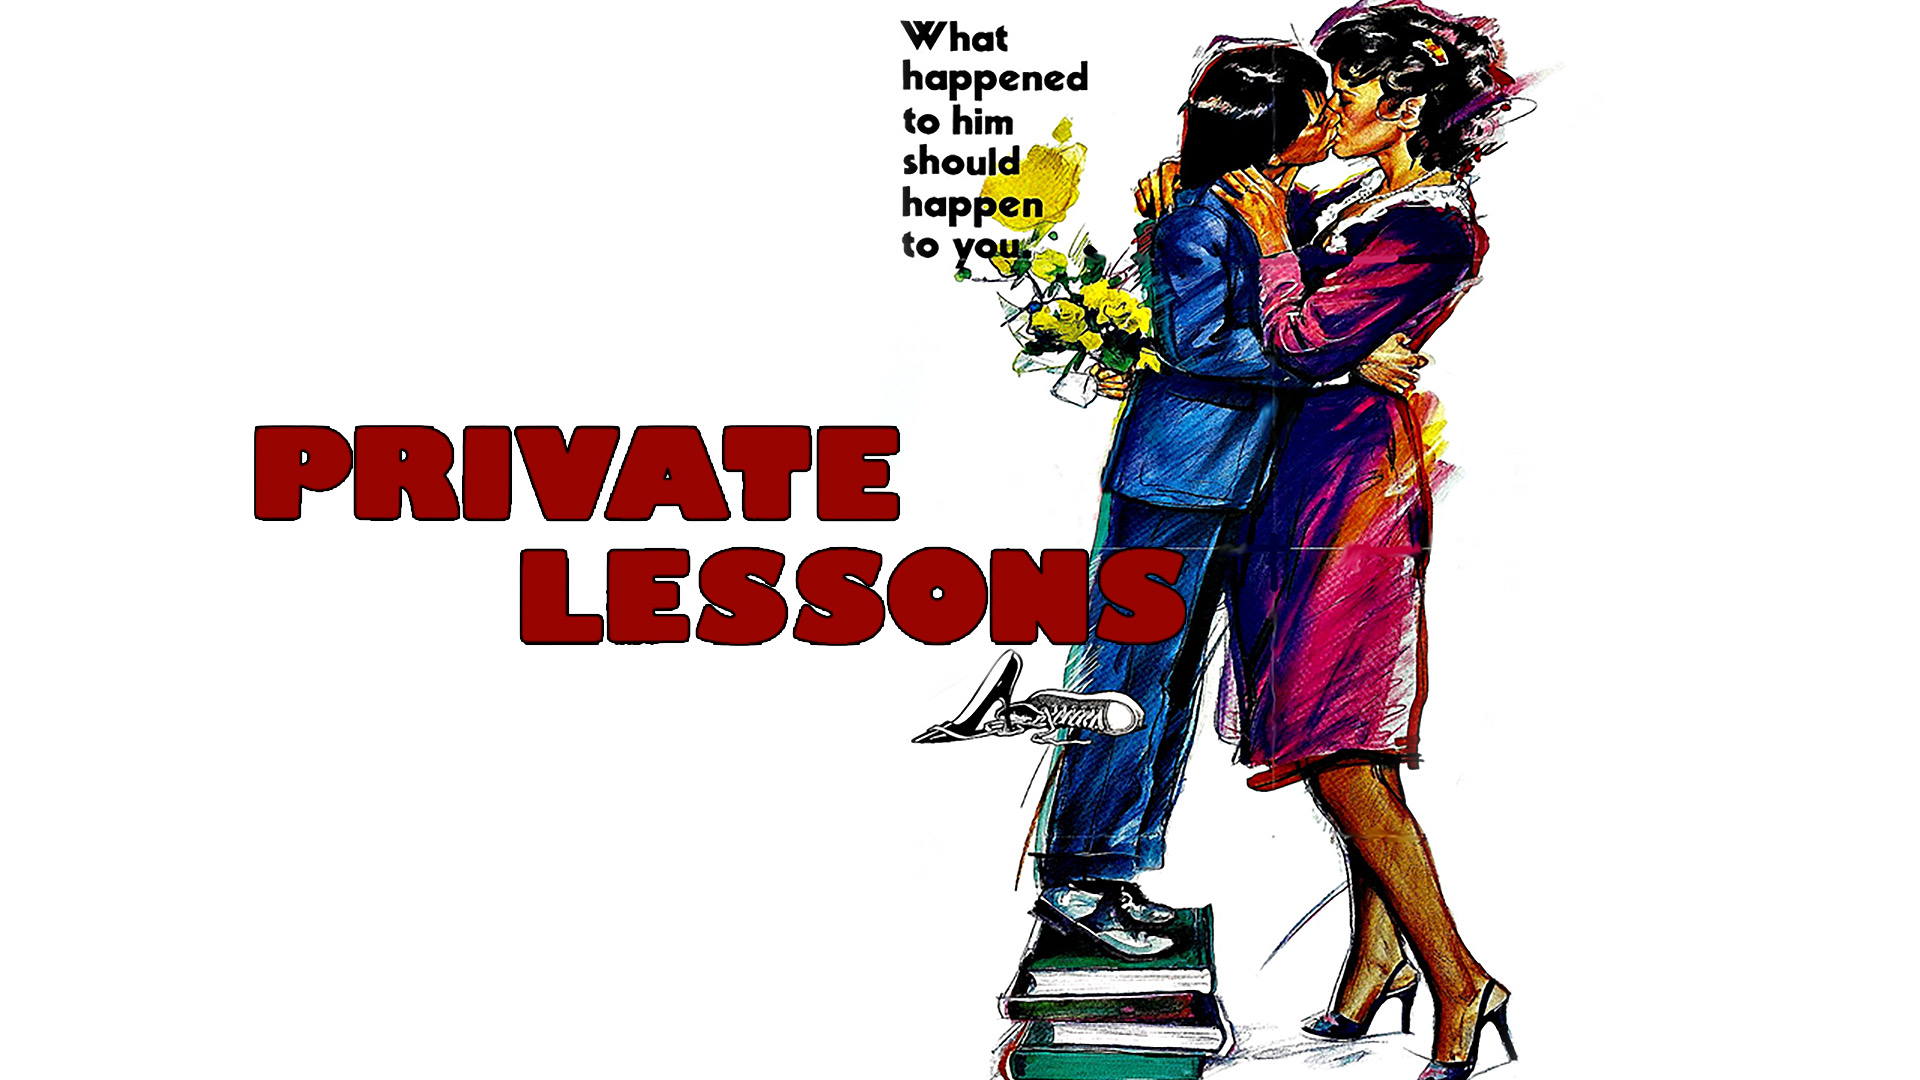 1981 Private Lessons Full Length Porn Movies - Private Lessons